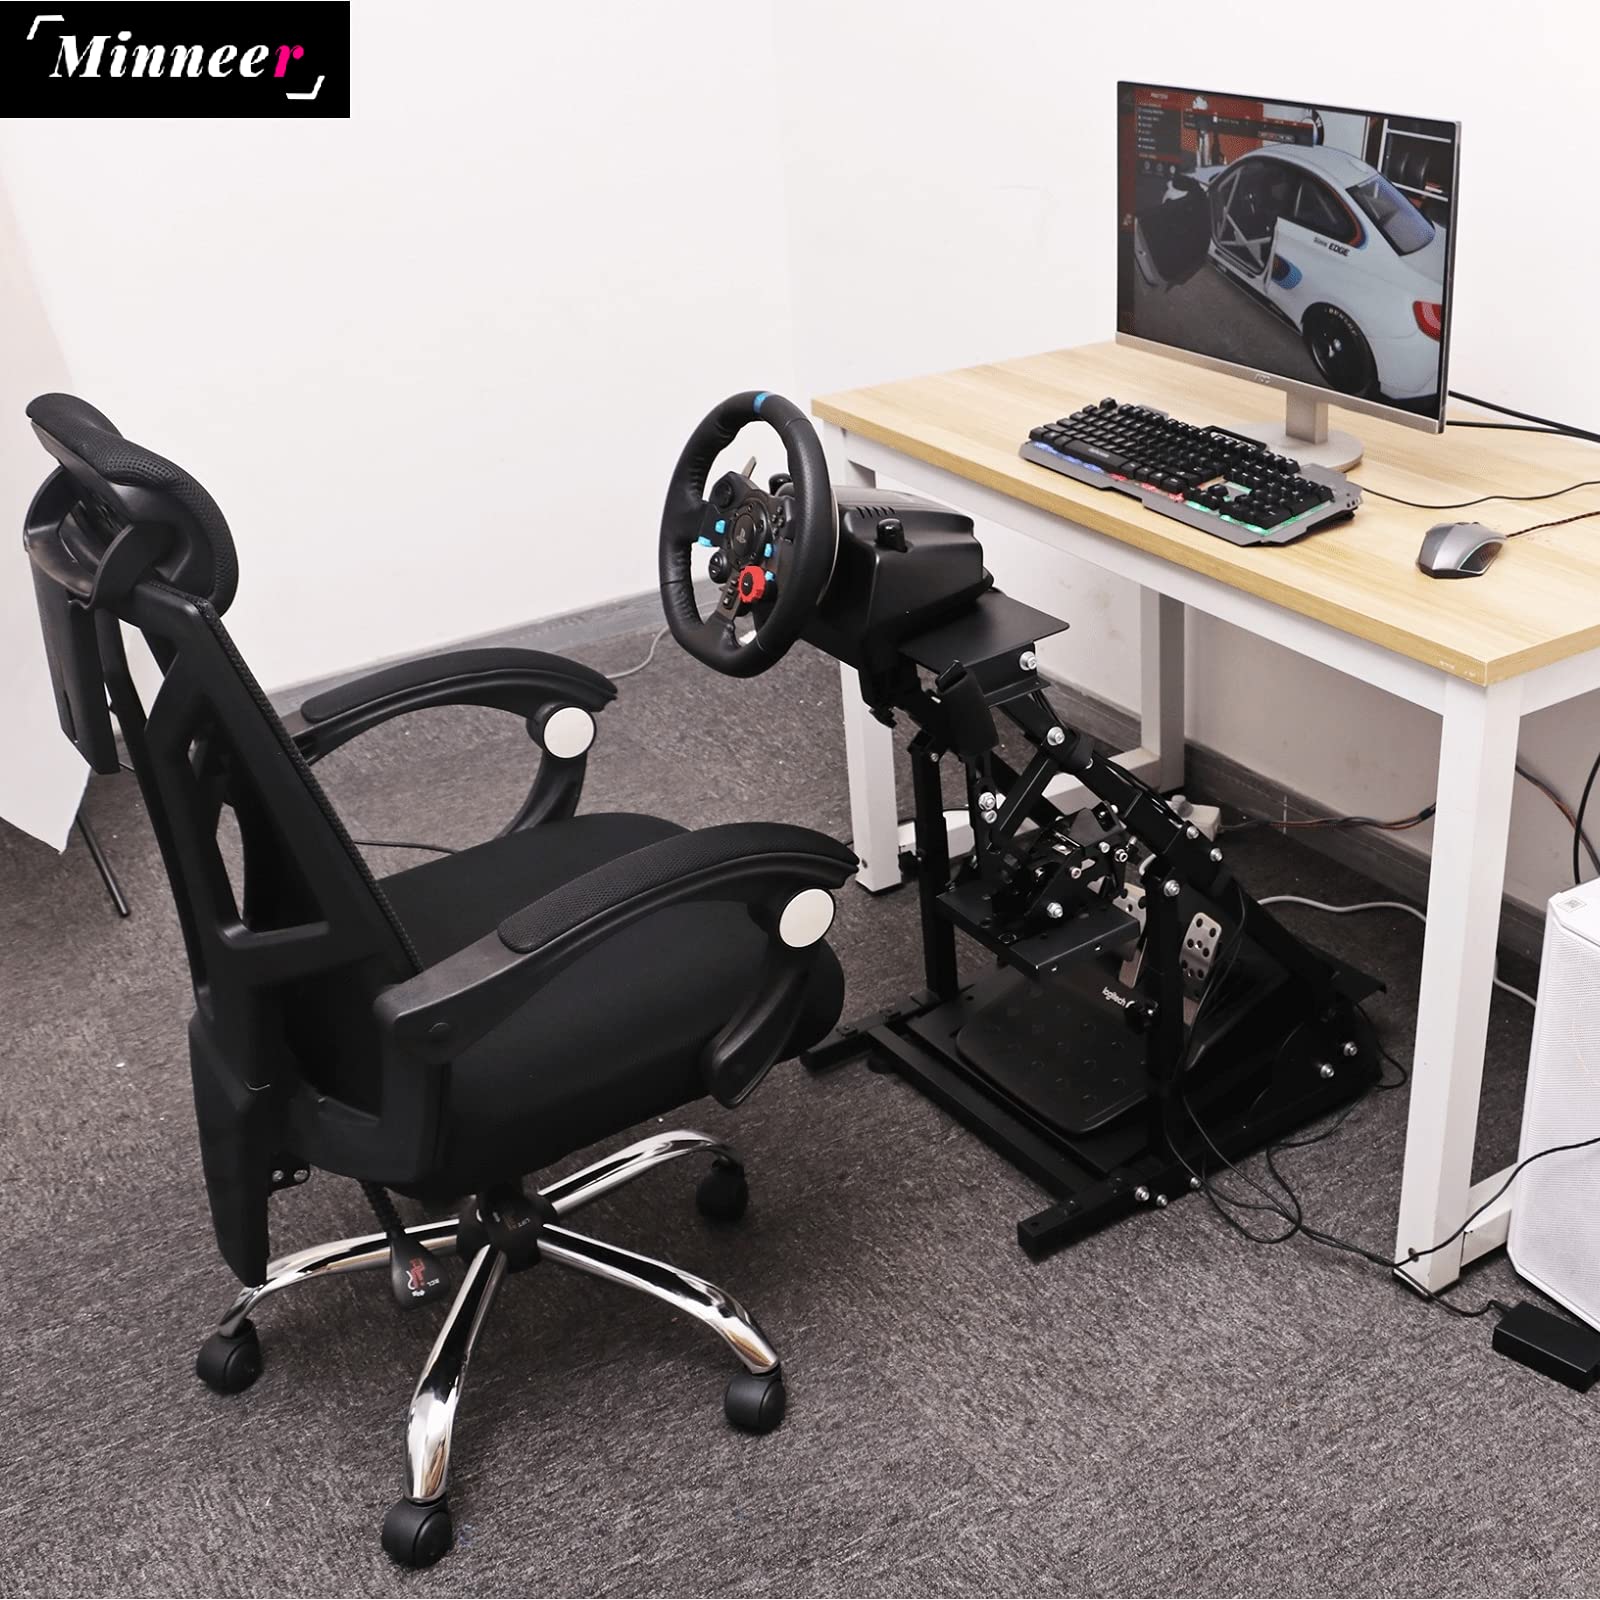 Minneer Simulator Driving Cockpit with Real Racing Chair Compatible with Logitech G25 G27 G29 G920 G923 Adjustable Racing Wheel Stand Frame 並行輸入品